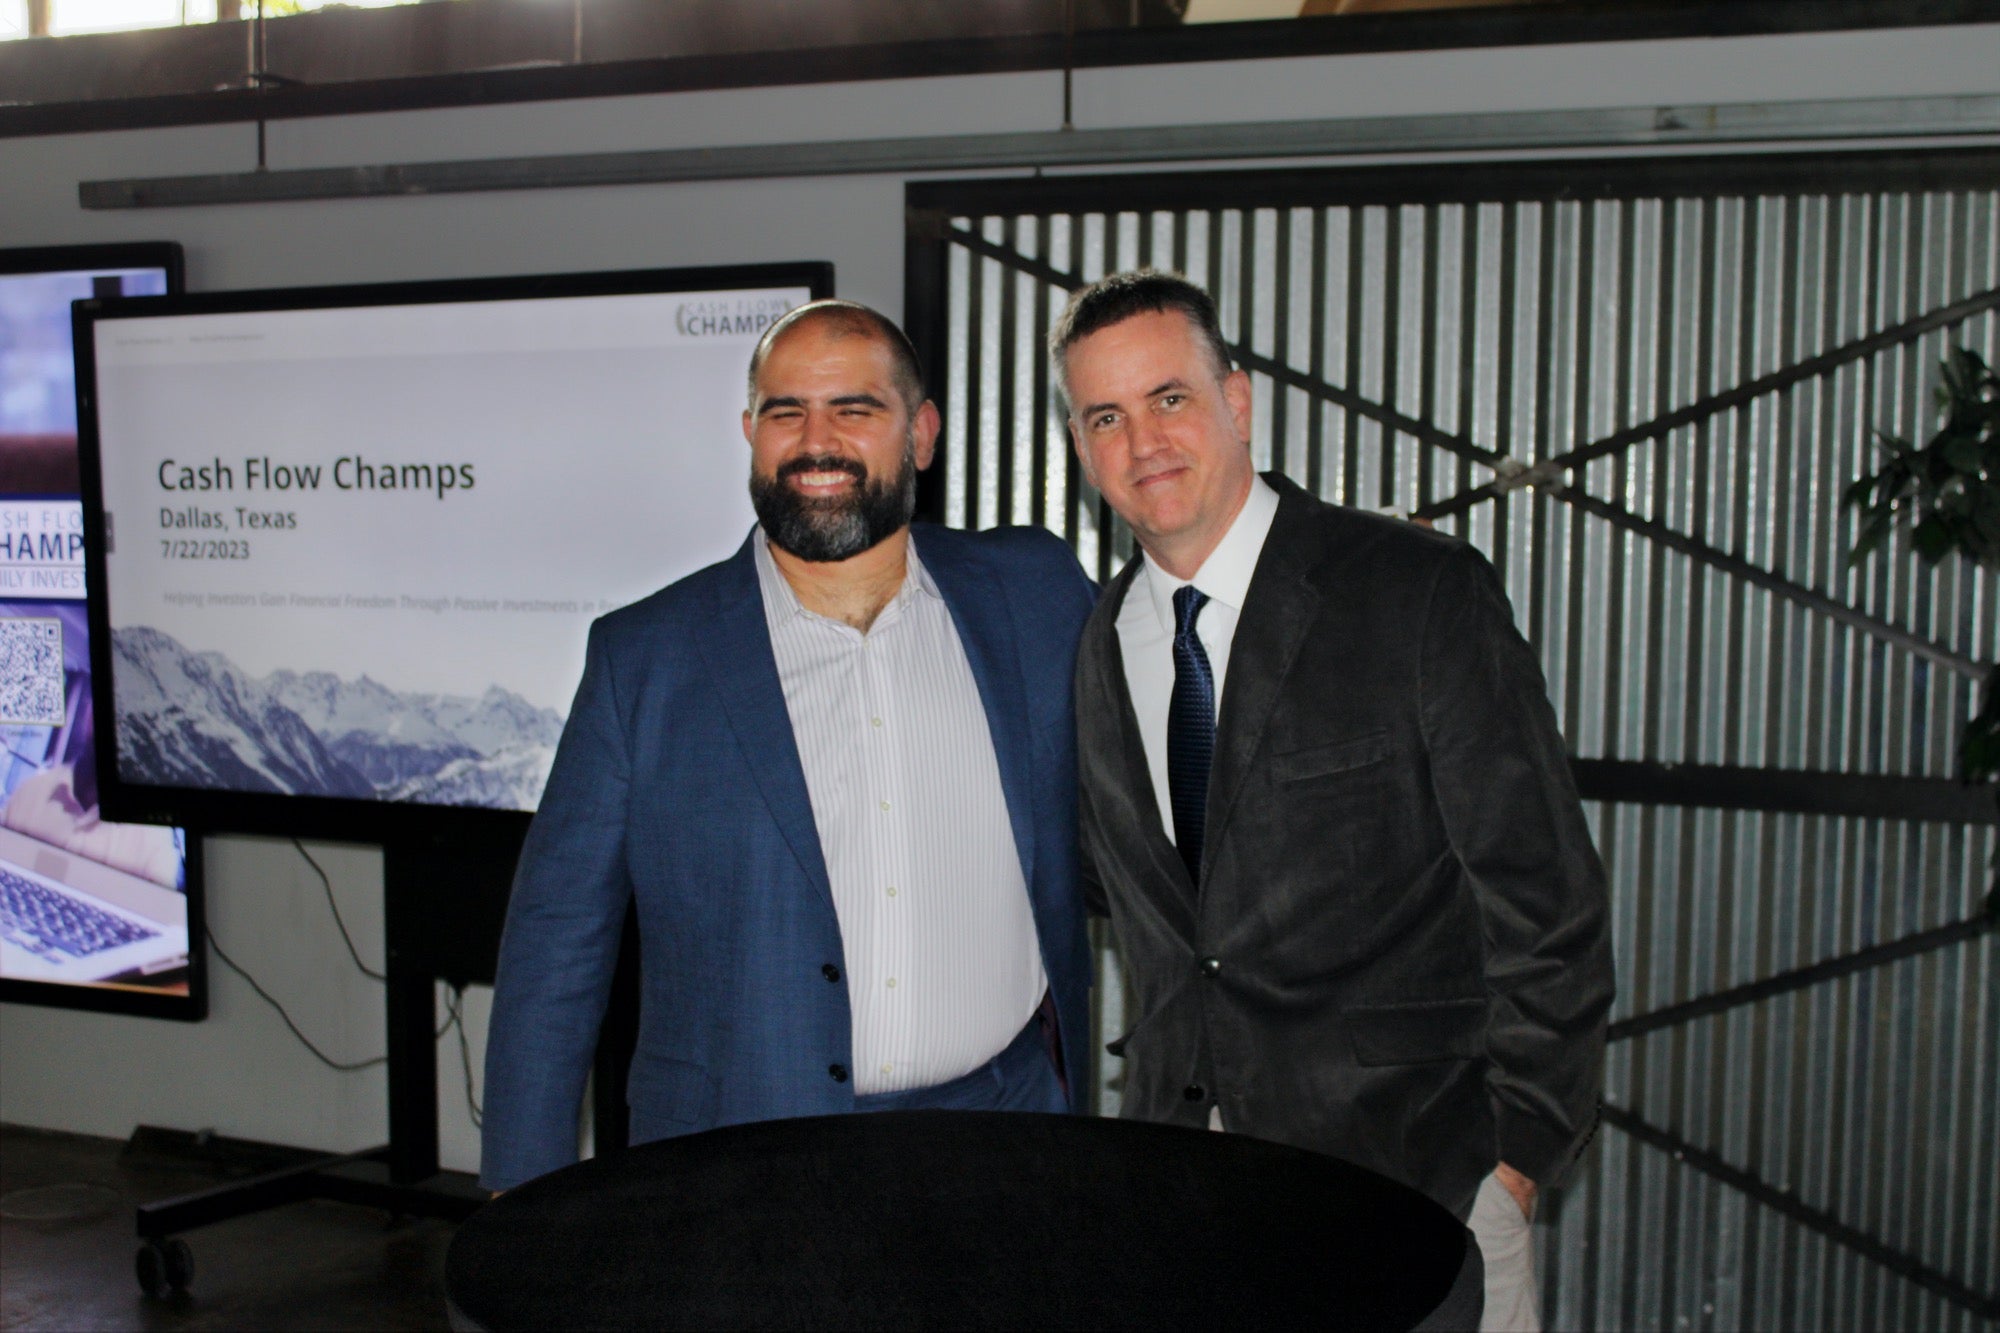 picture of Charles Seamen and Ryan Murphy from Cash Flow Champs Multi-Family Real Estate Management & Investment Firm at Dallas Socialite networking event in Dallas, Texas July 22nd 2023